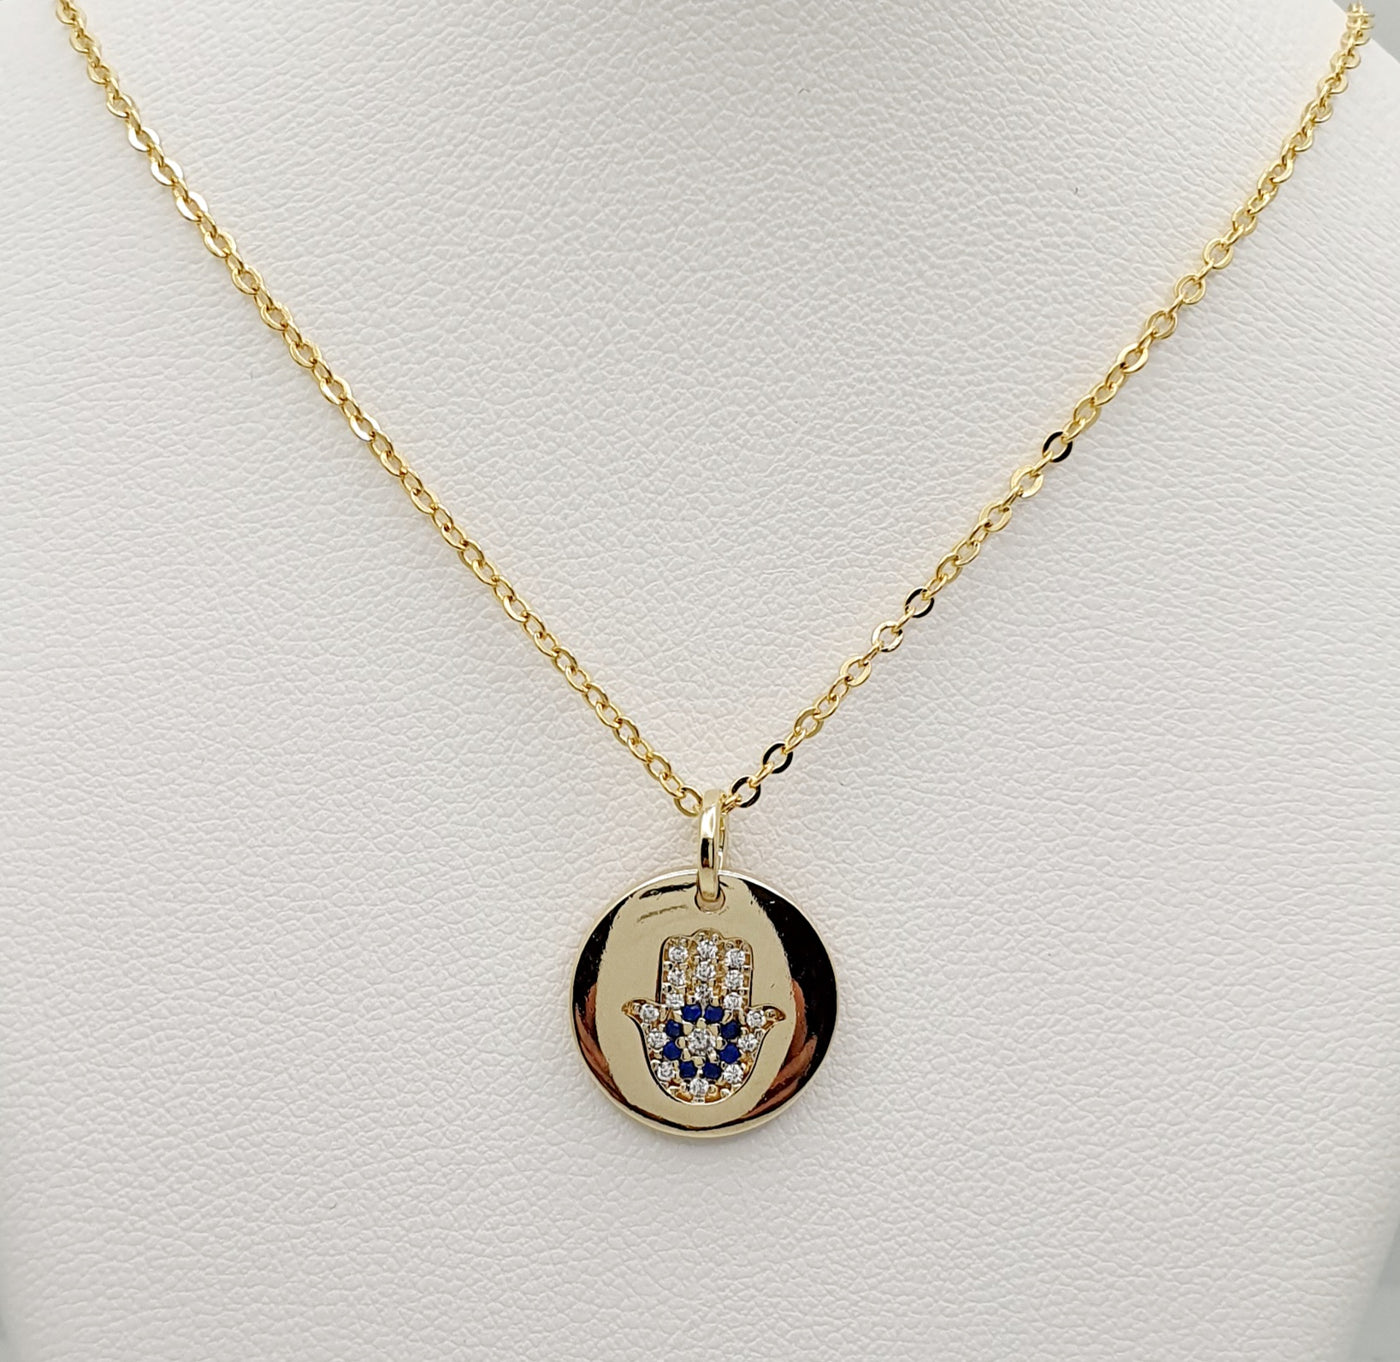 18K Gold, Filled, Hamsa Pendant With CZ's on a 45cm Adjustable Chain